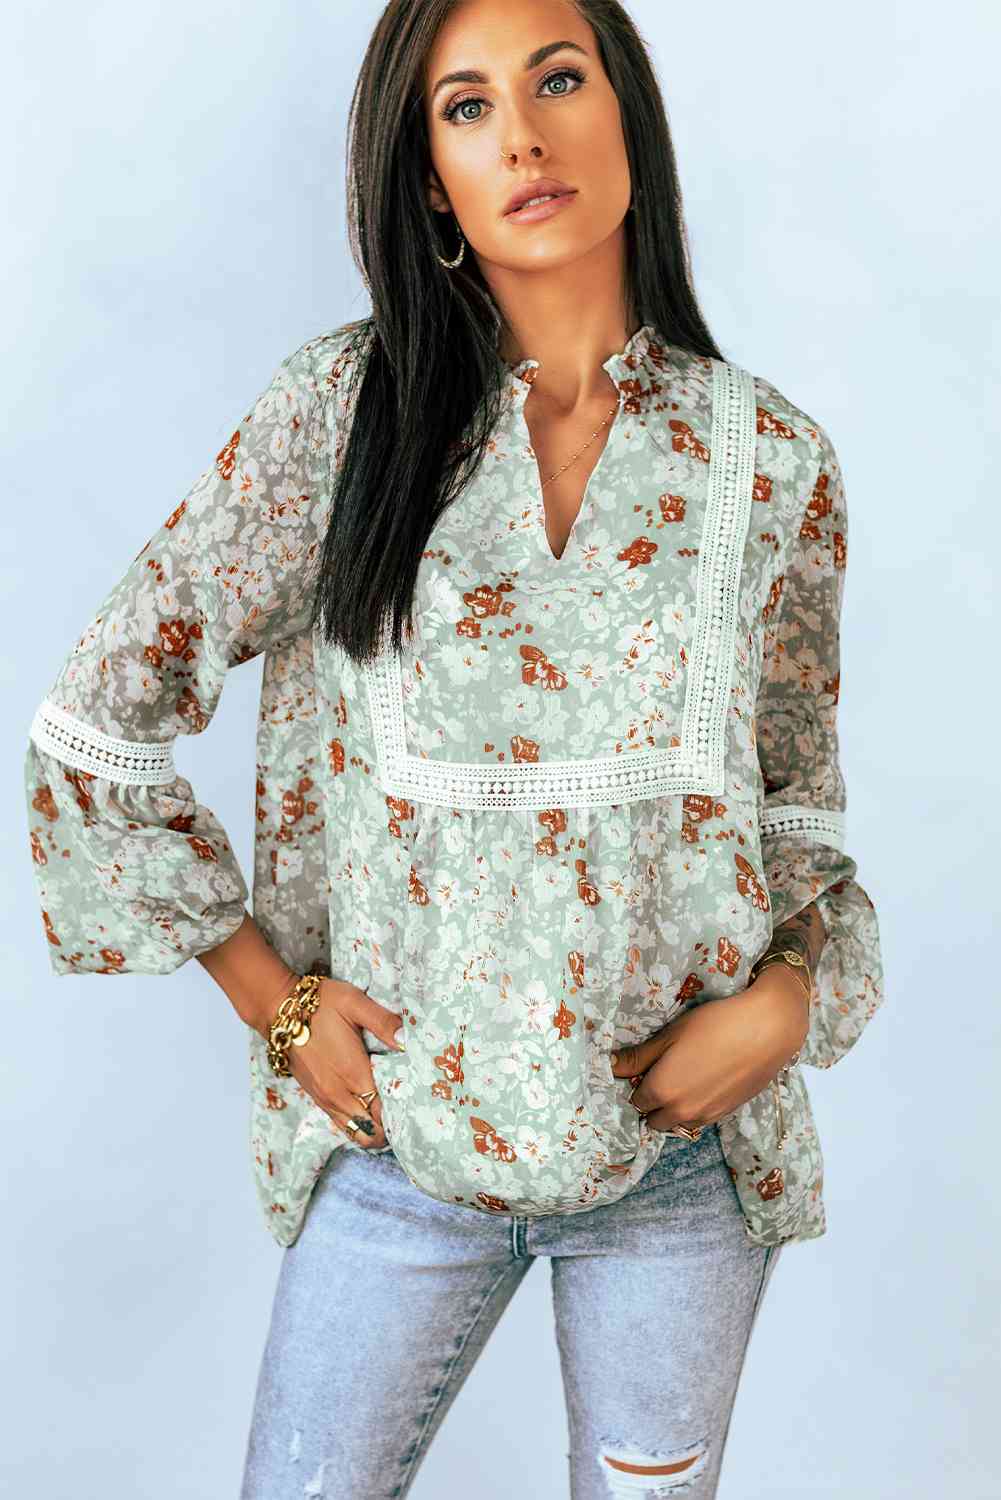 FULL SIZE Sage Green Floral Lace Trim Blouse